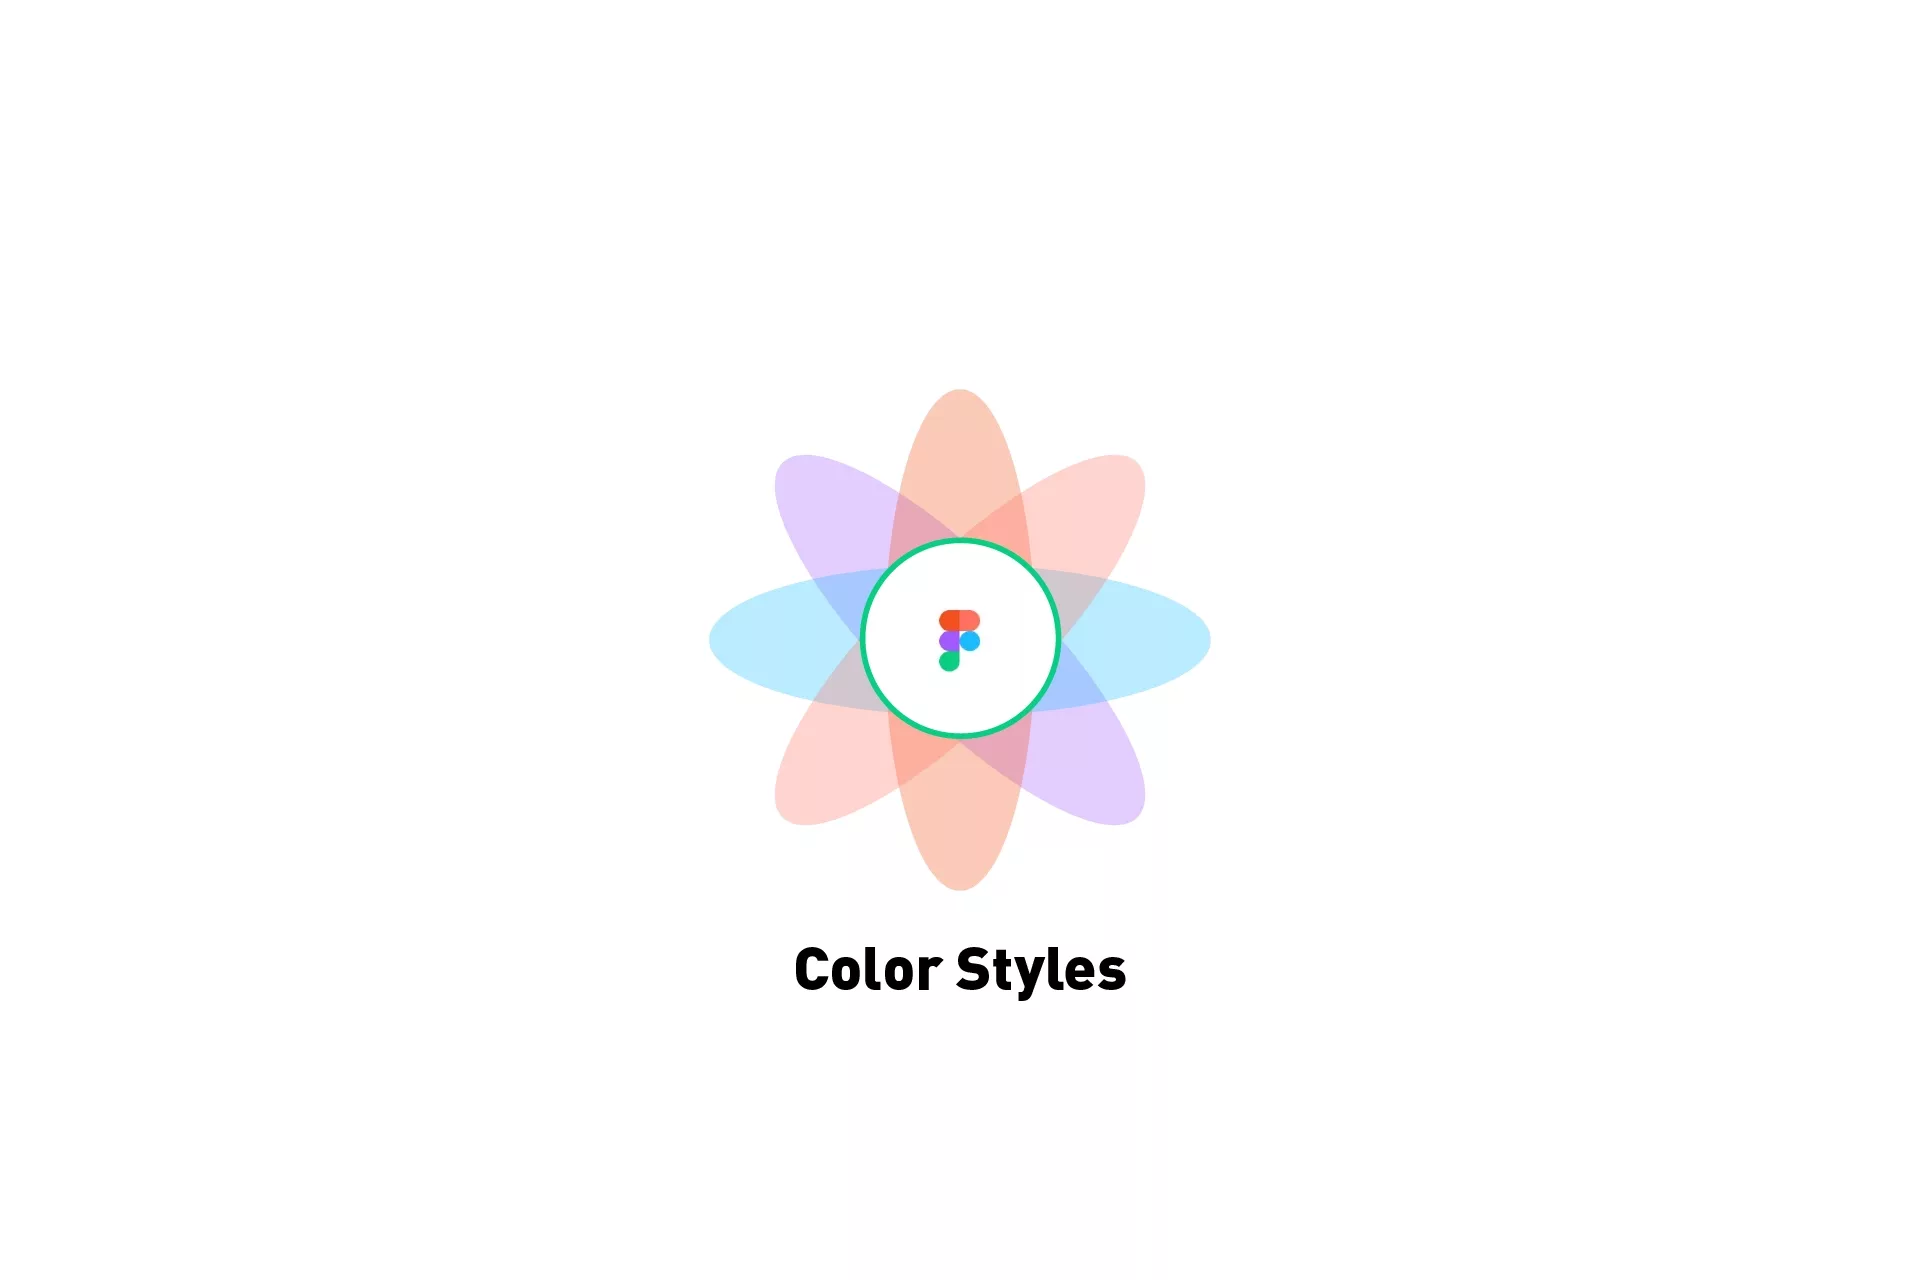 A flower representing the Figma with the text 'Color Styles' below it.